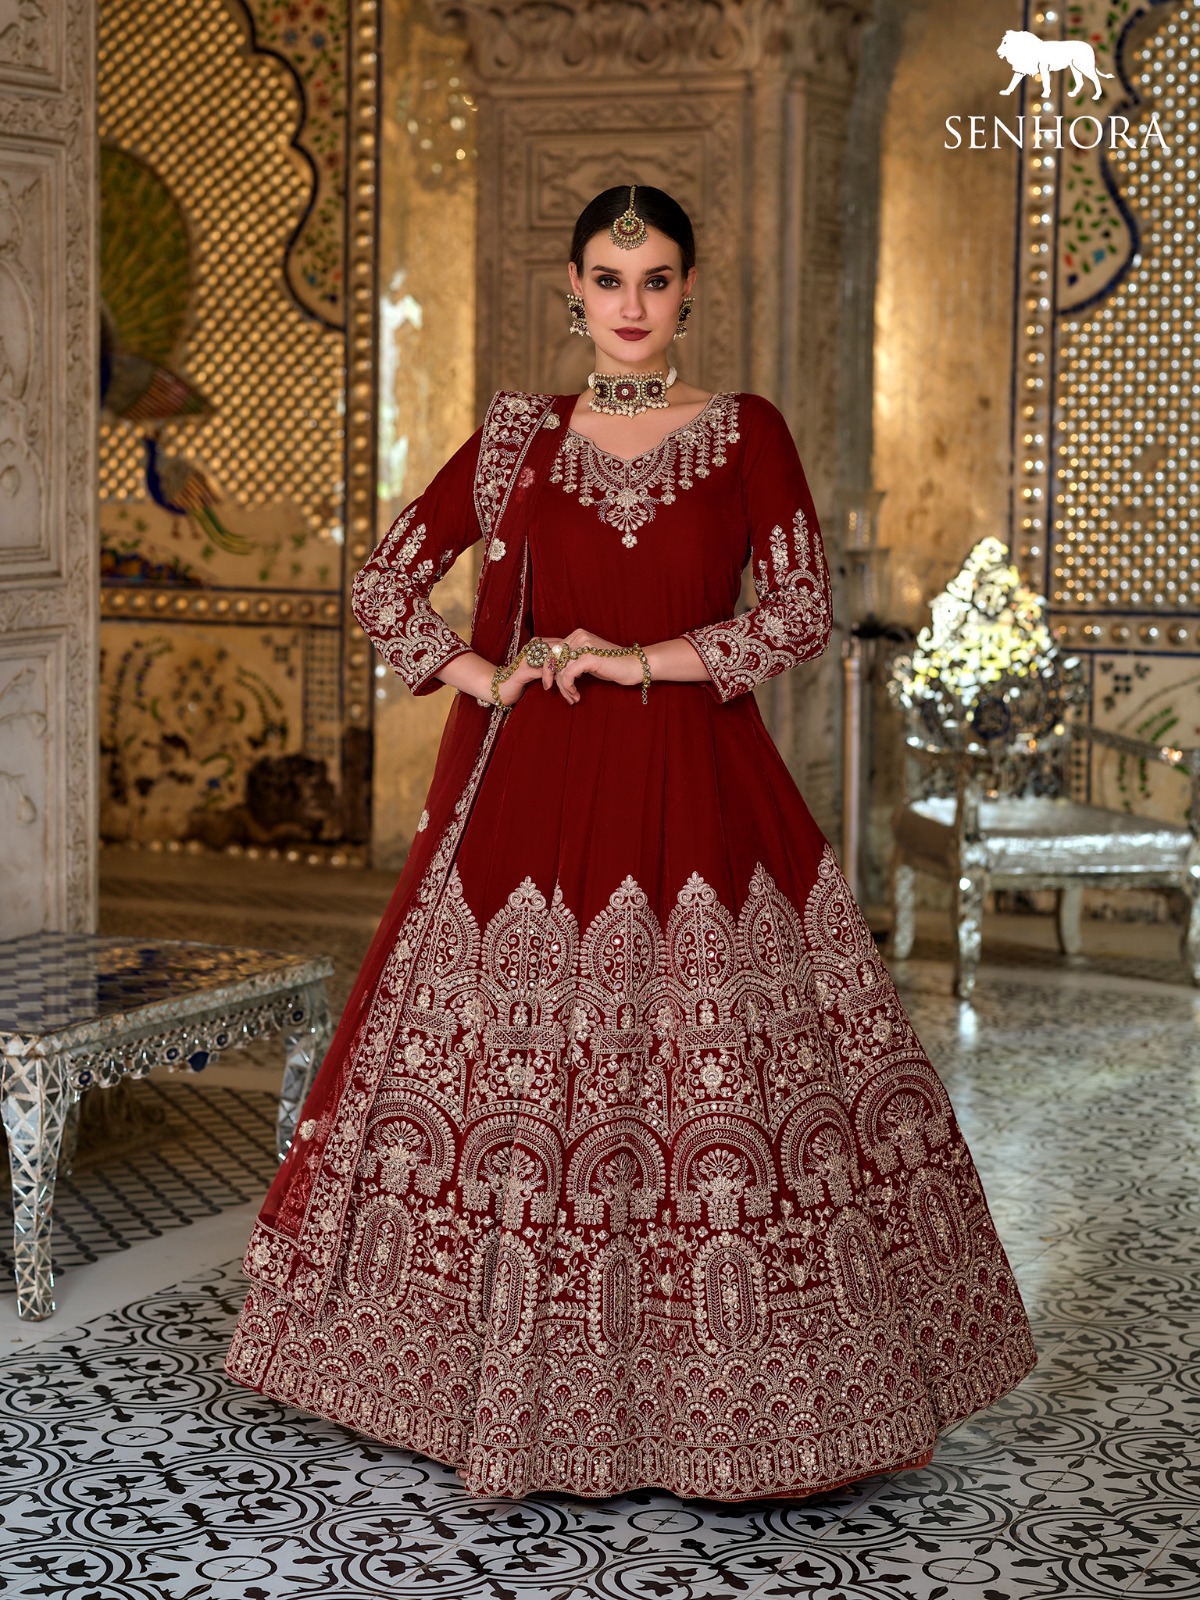 Premium Embellished Pakistani Designer Dulhan Suit in Long Gown  Nameera  by Farooq